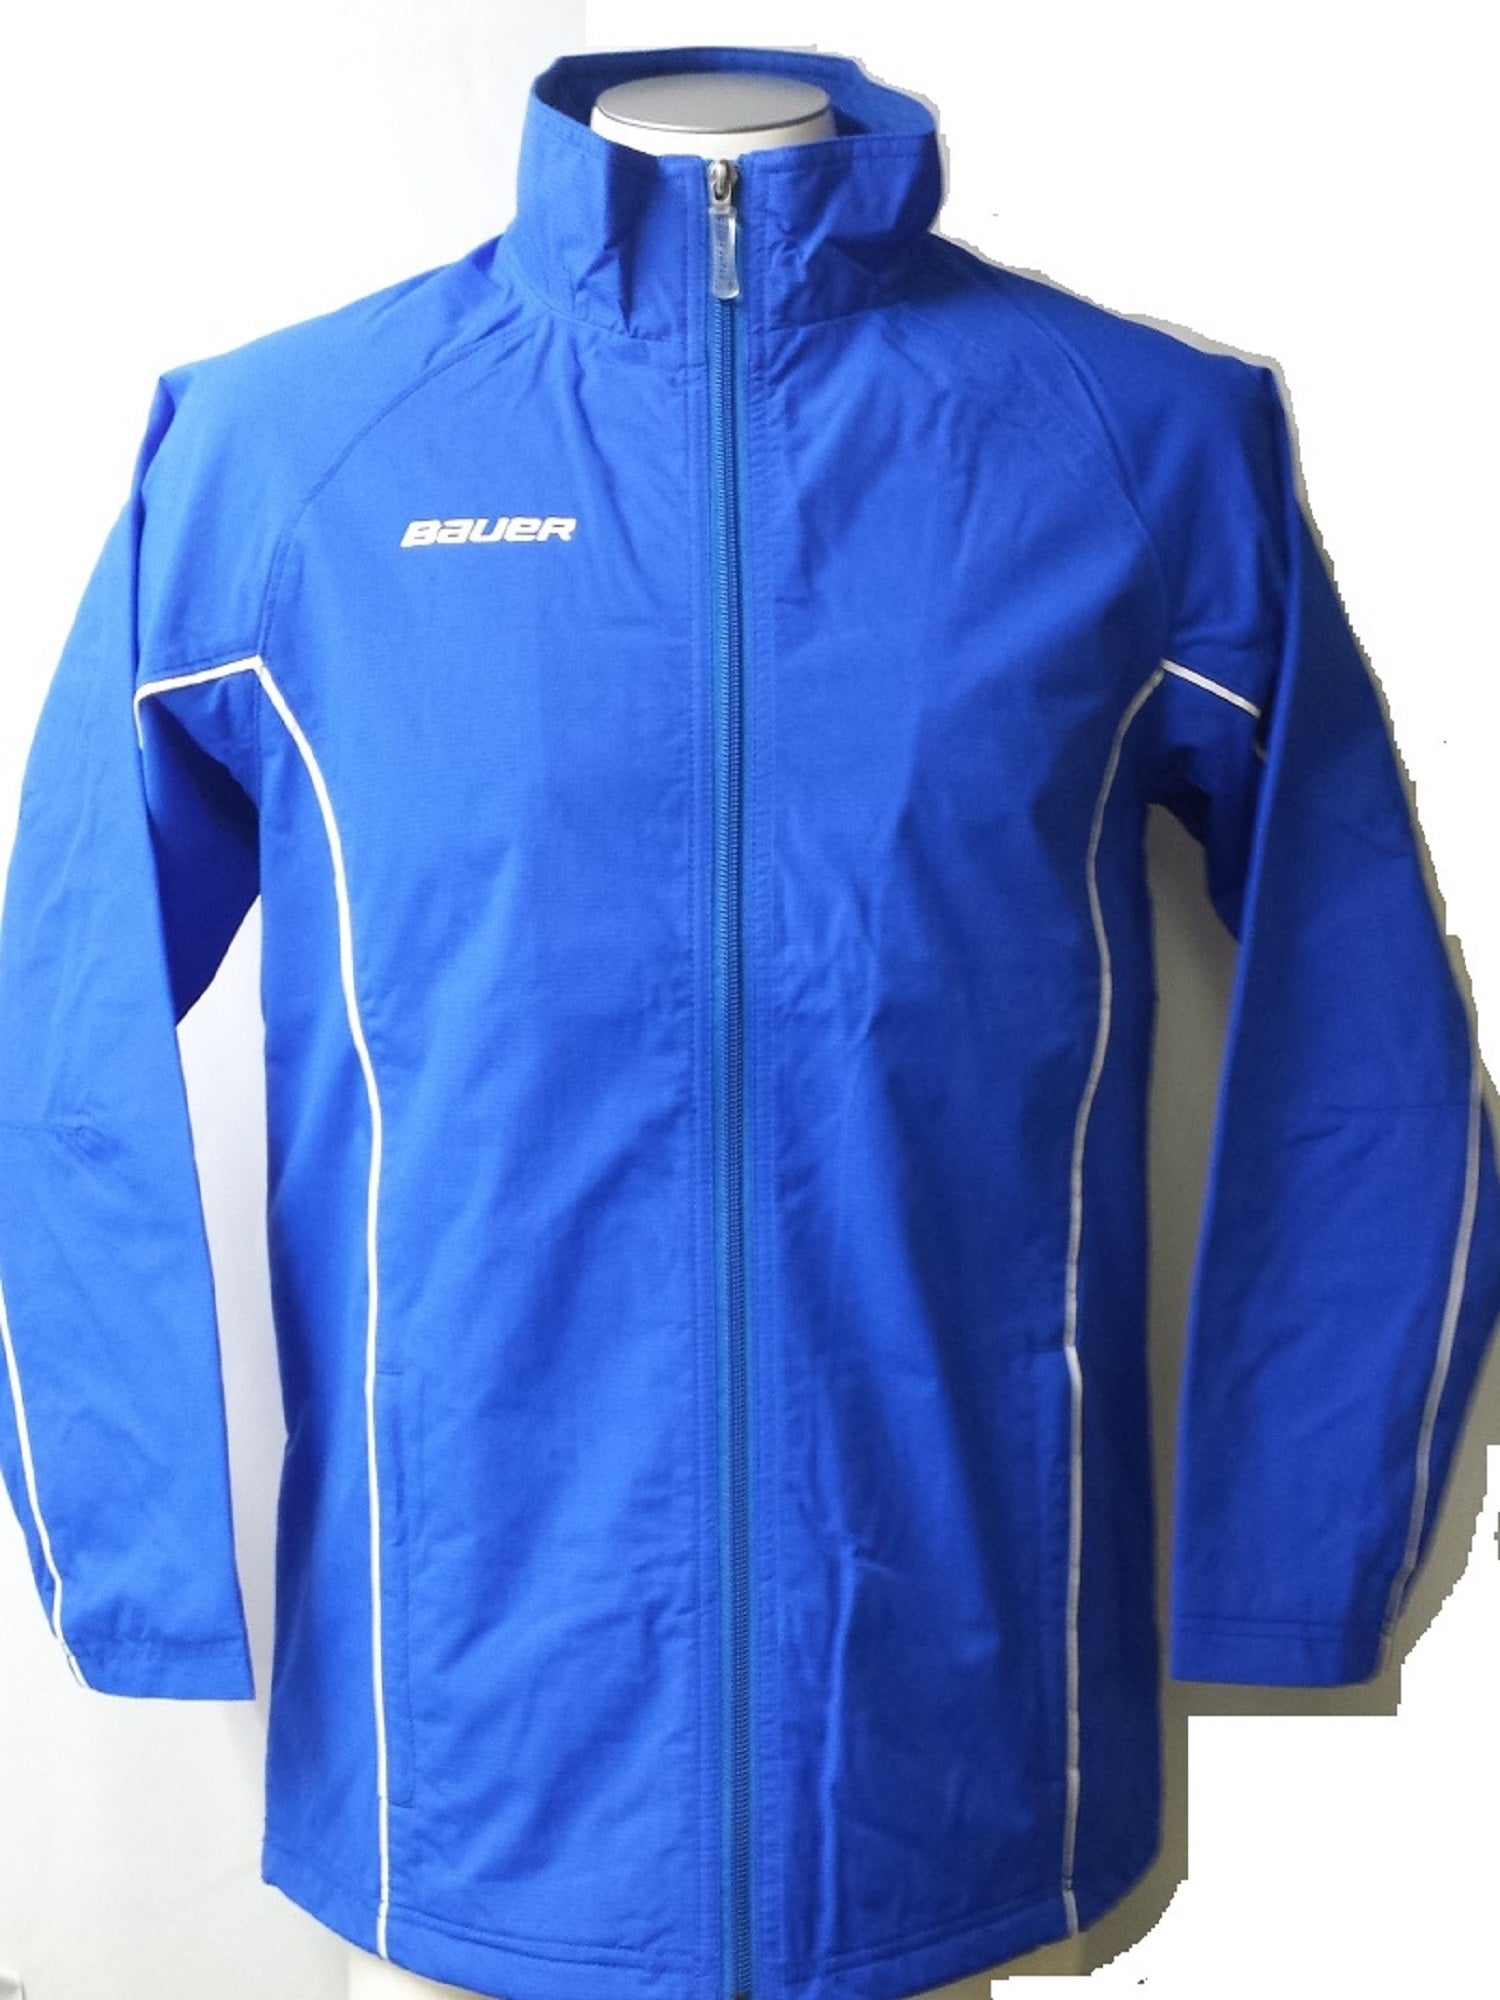 Bauer Youth Warm Up Jacket, Royal X-Small